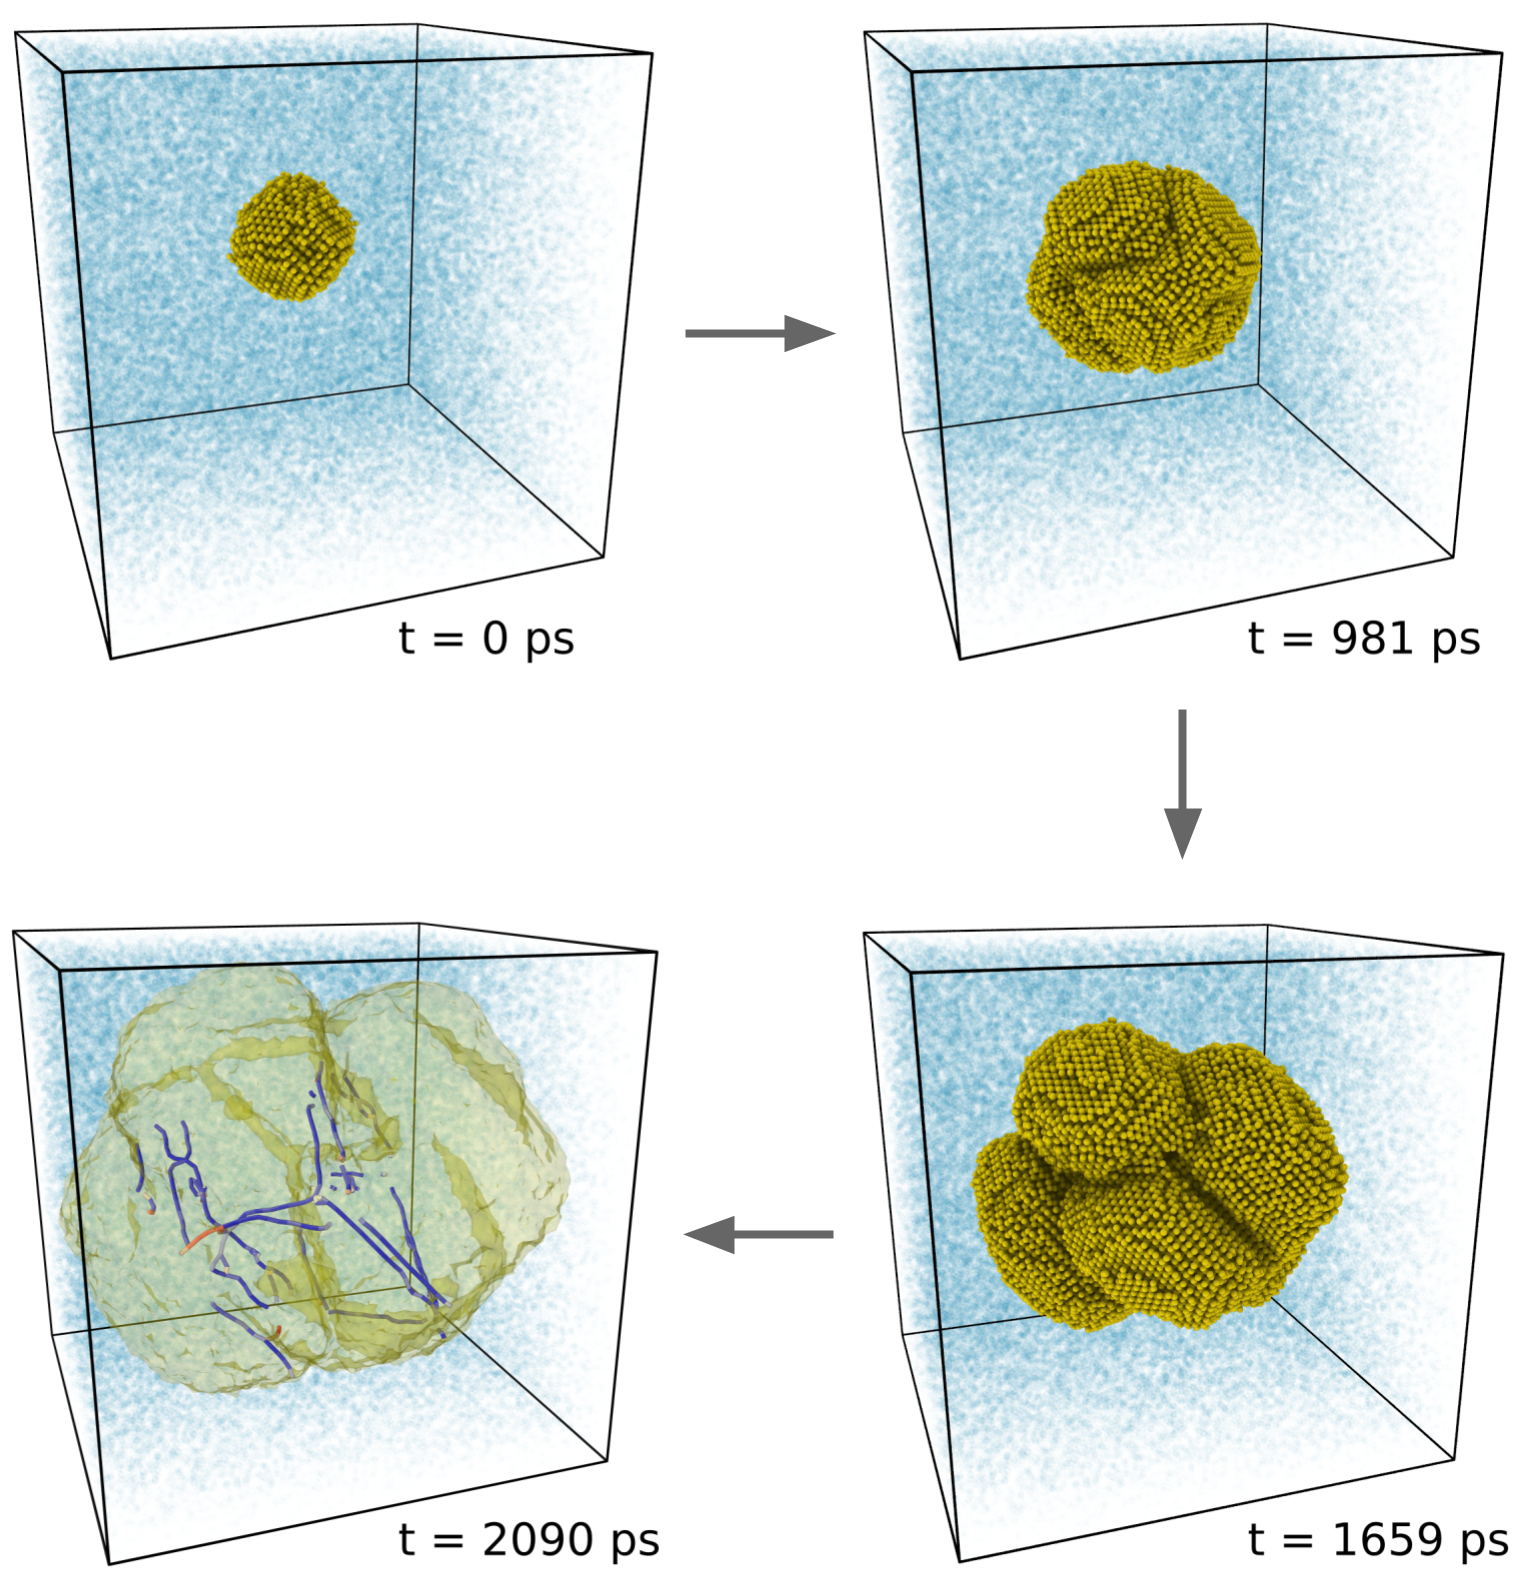 Crystal growth of silicon using Molecular Dynamics. The last frame shows the dislocation network formed during the growth process. Atomistic simulations of this magnitude have been called "cross-scale" for their ability to represent mesoscale elements of the microstructure while accounting for each constituent atom individually.